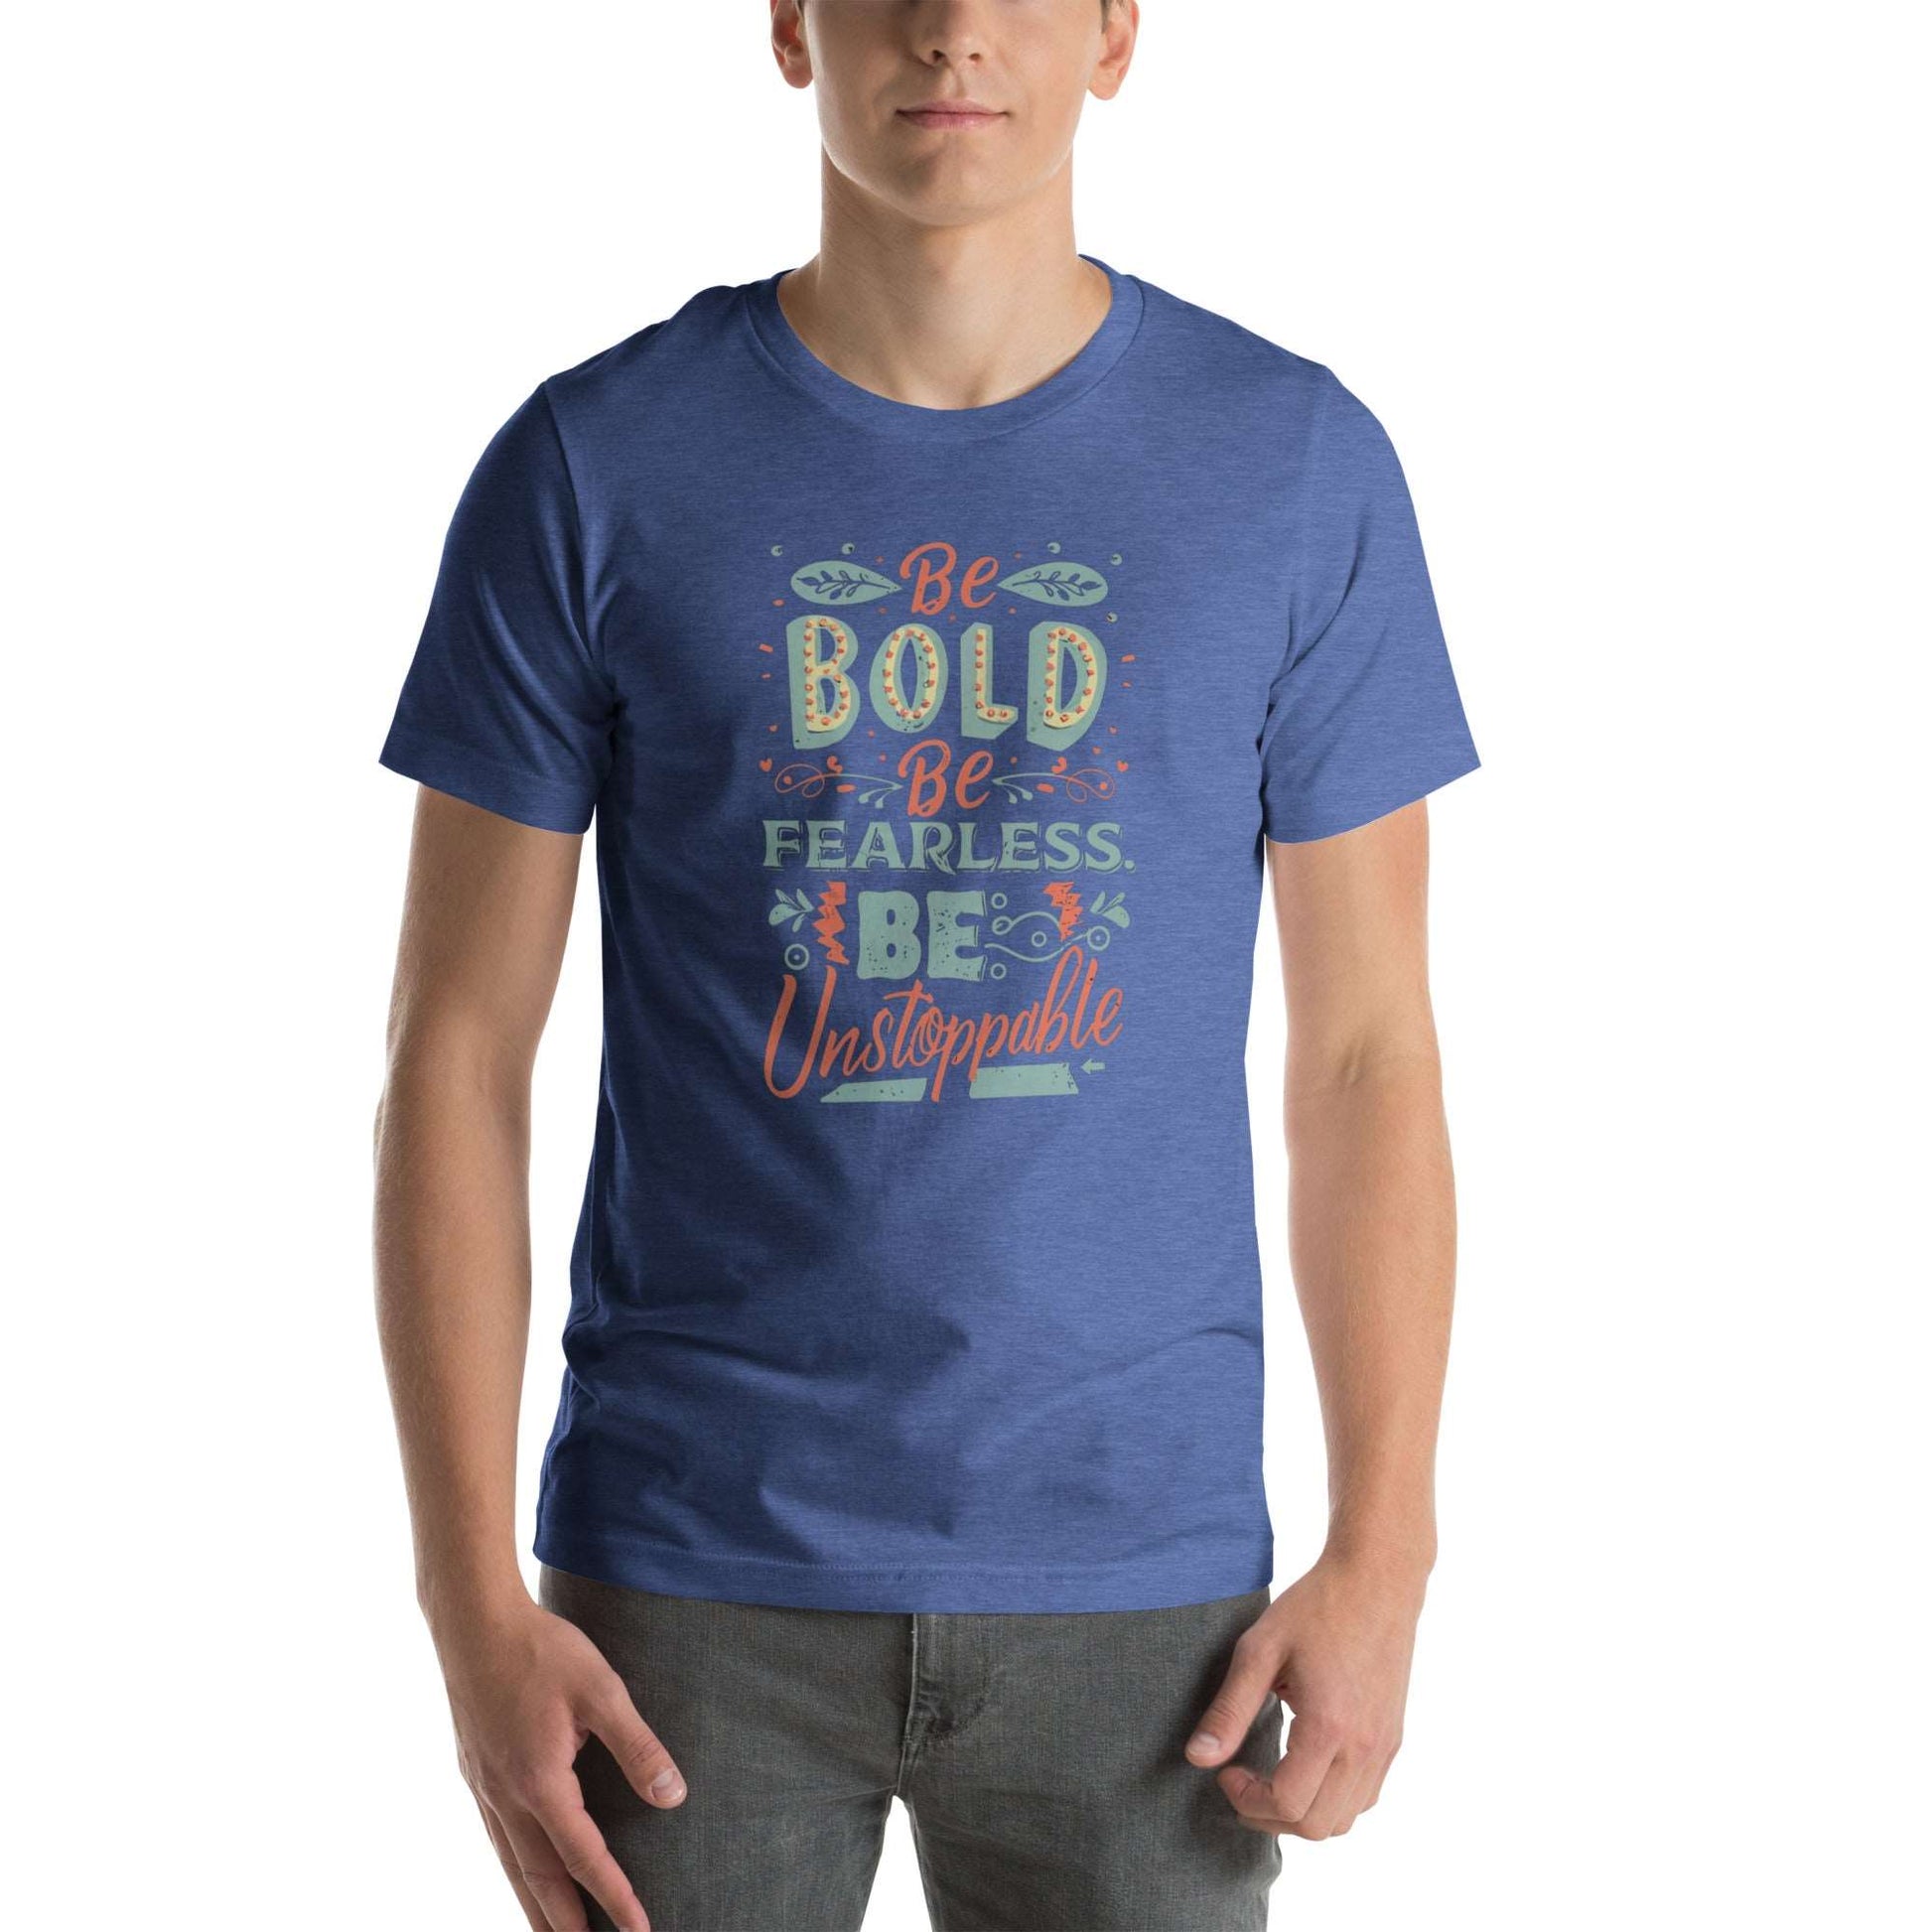 BE BOLD BE FEARLESS BE UNSTOPPABLE - Unisex t-shirt